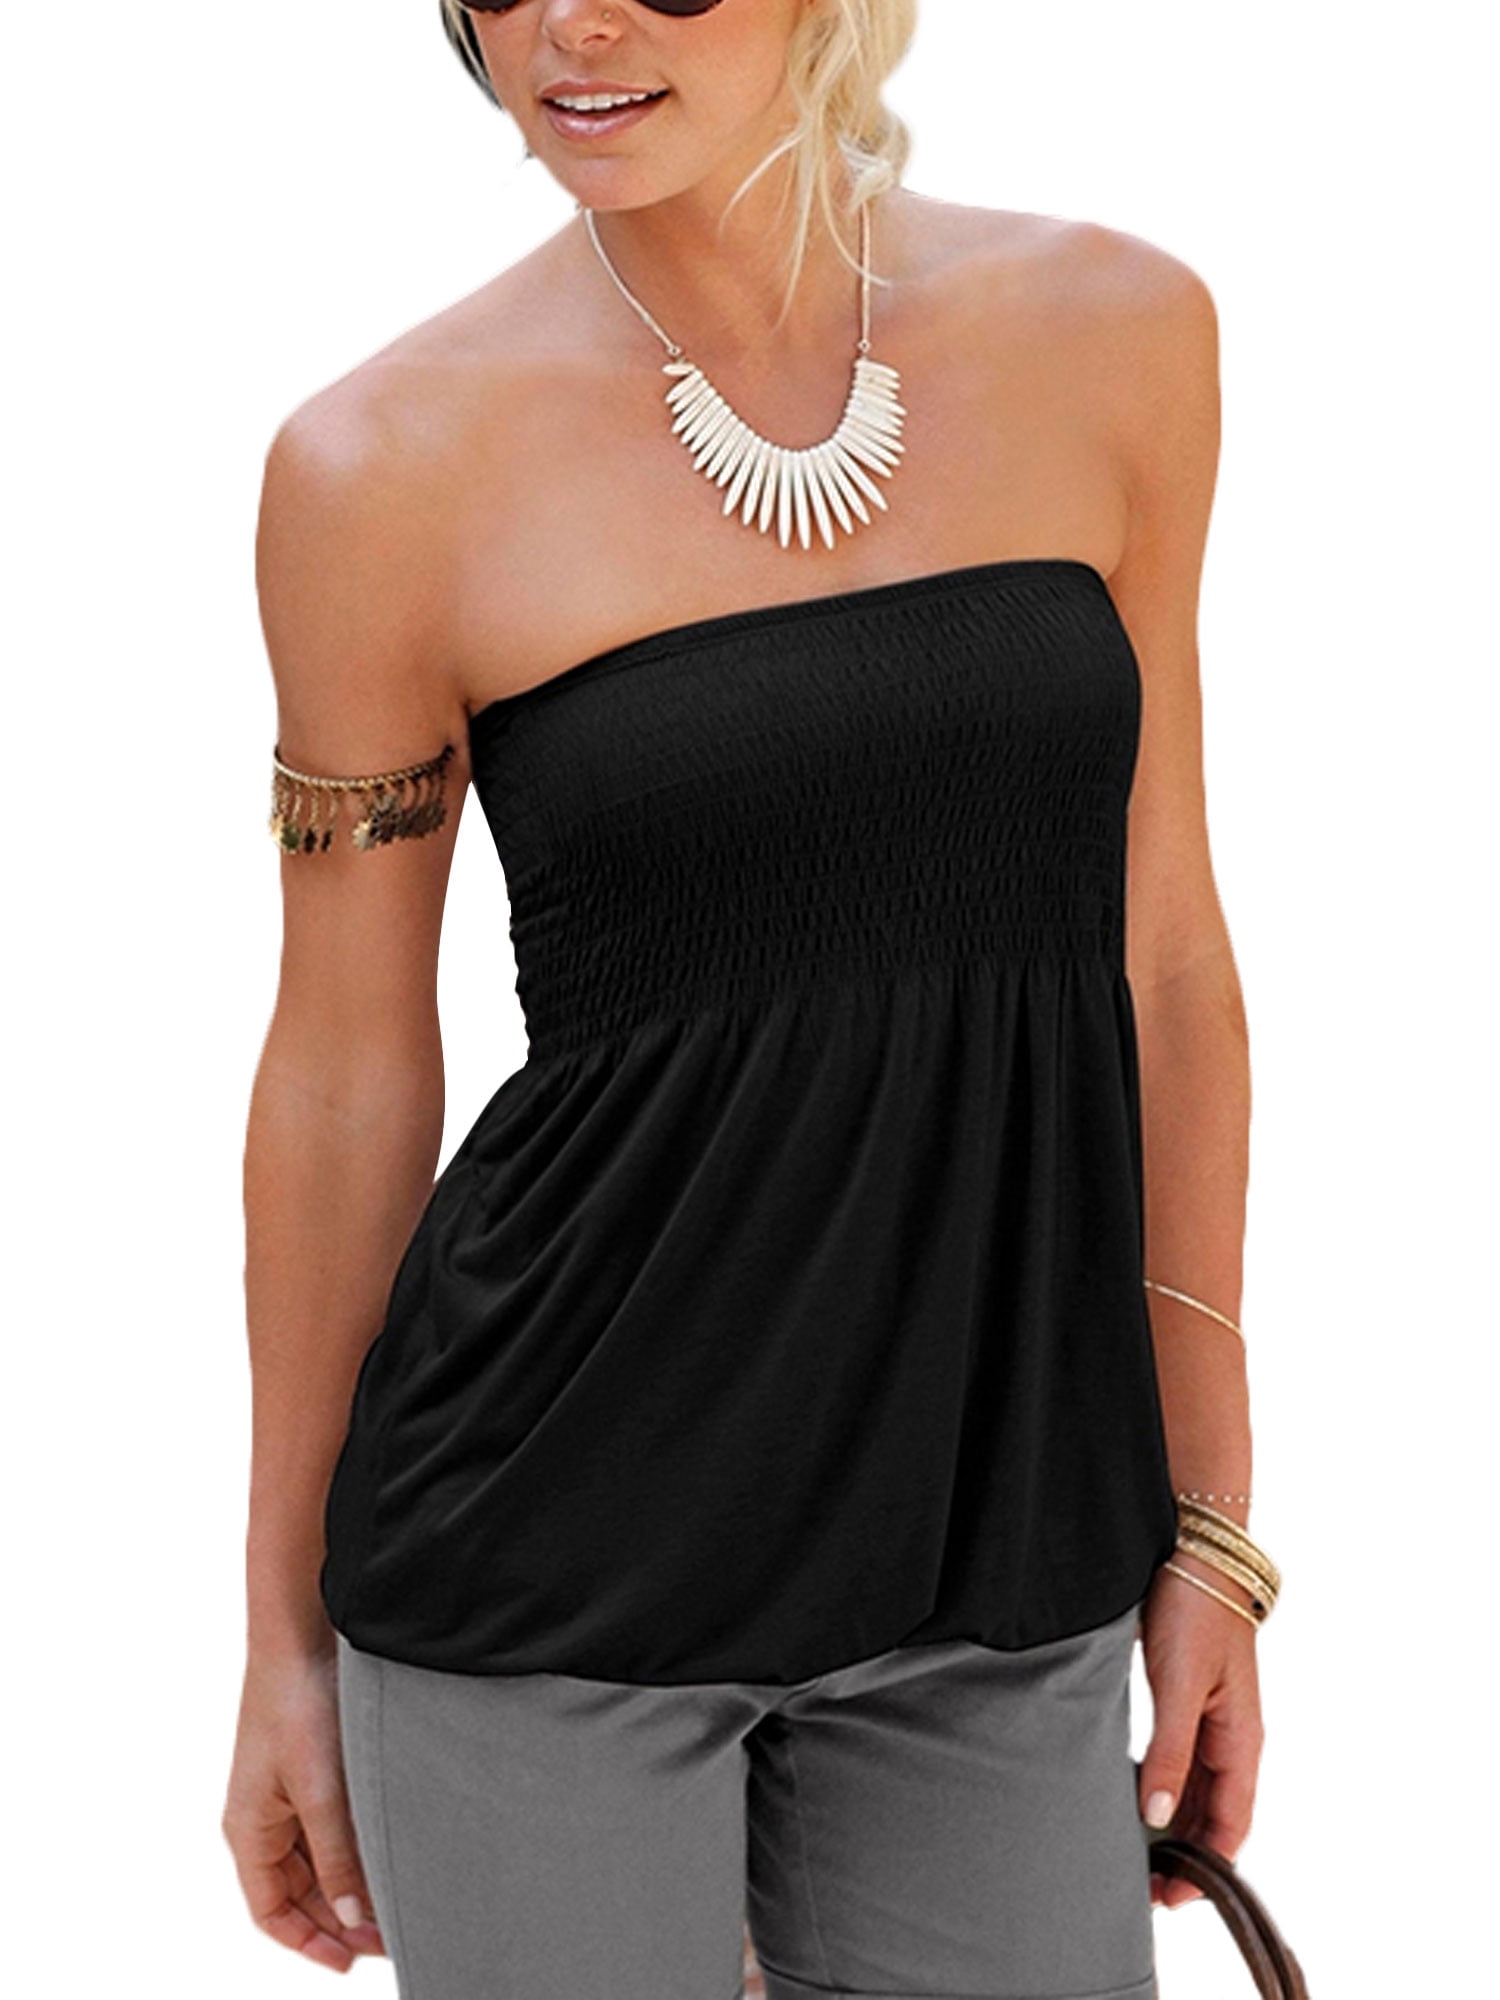 Sexy Camisole Tops Women, Camisole Tank Top Tube Sexy